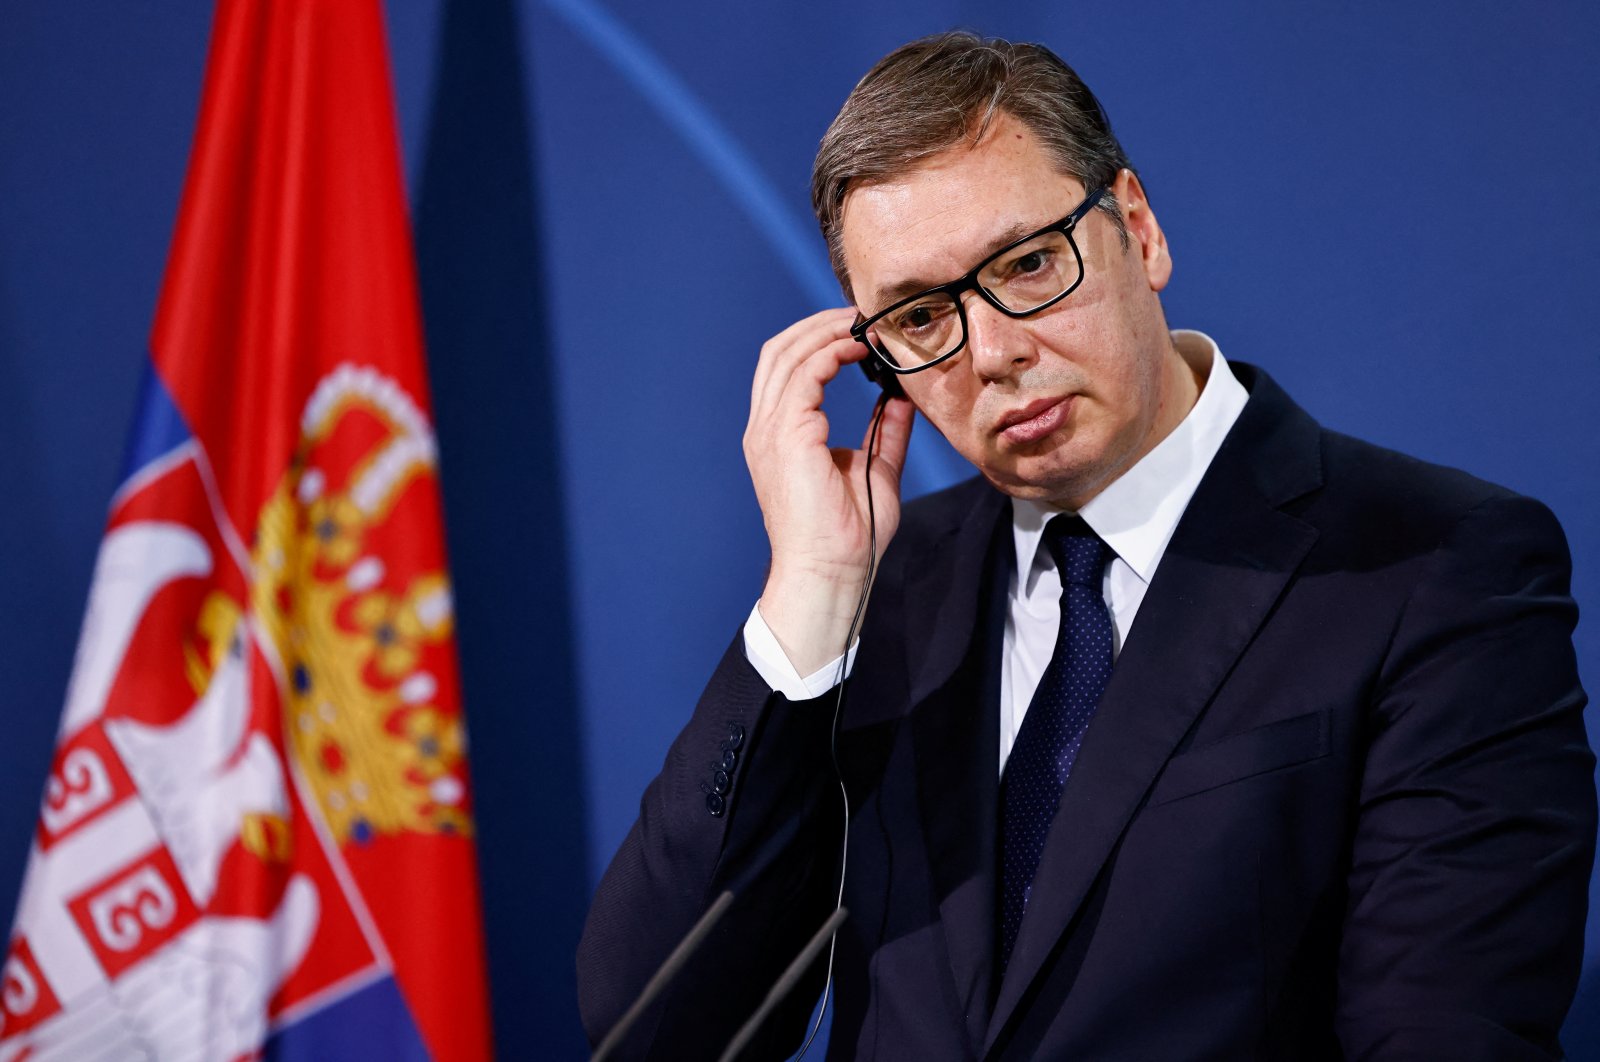 Serbian President Aleksandar Vucic attends a news conference in Berlin, Germany May 4, 2022. (Reuters Photo)